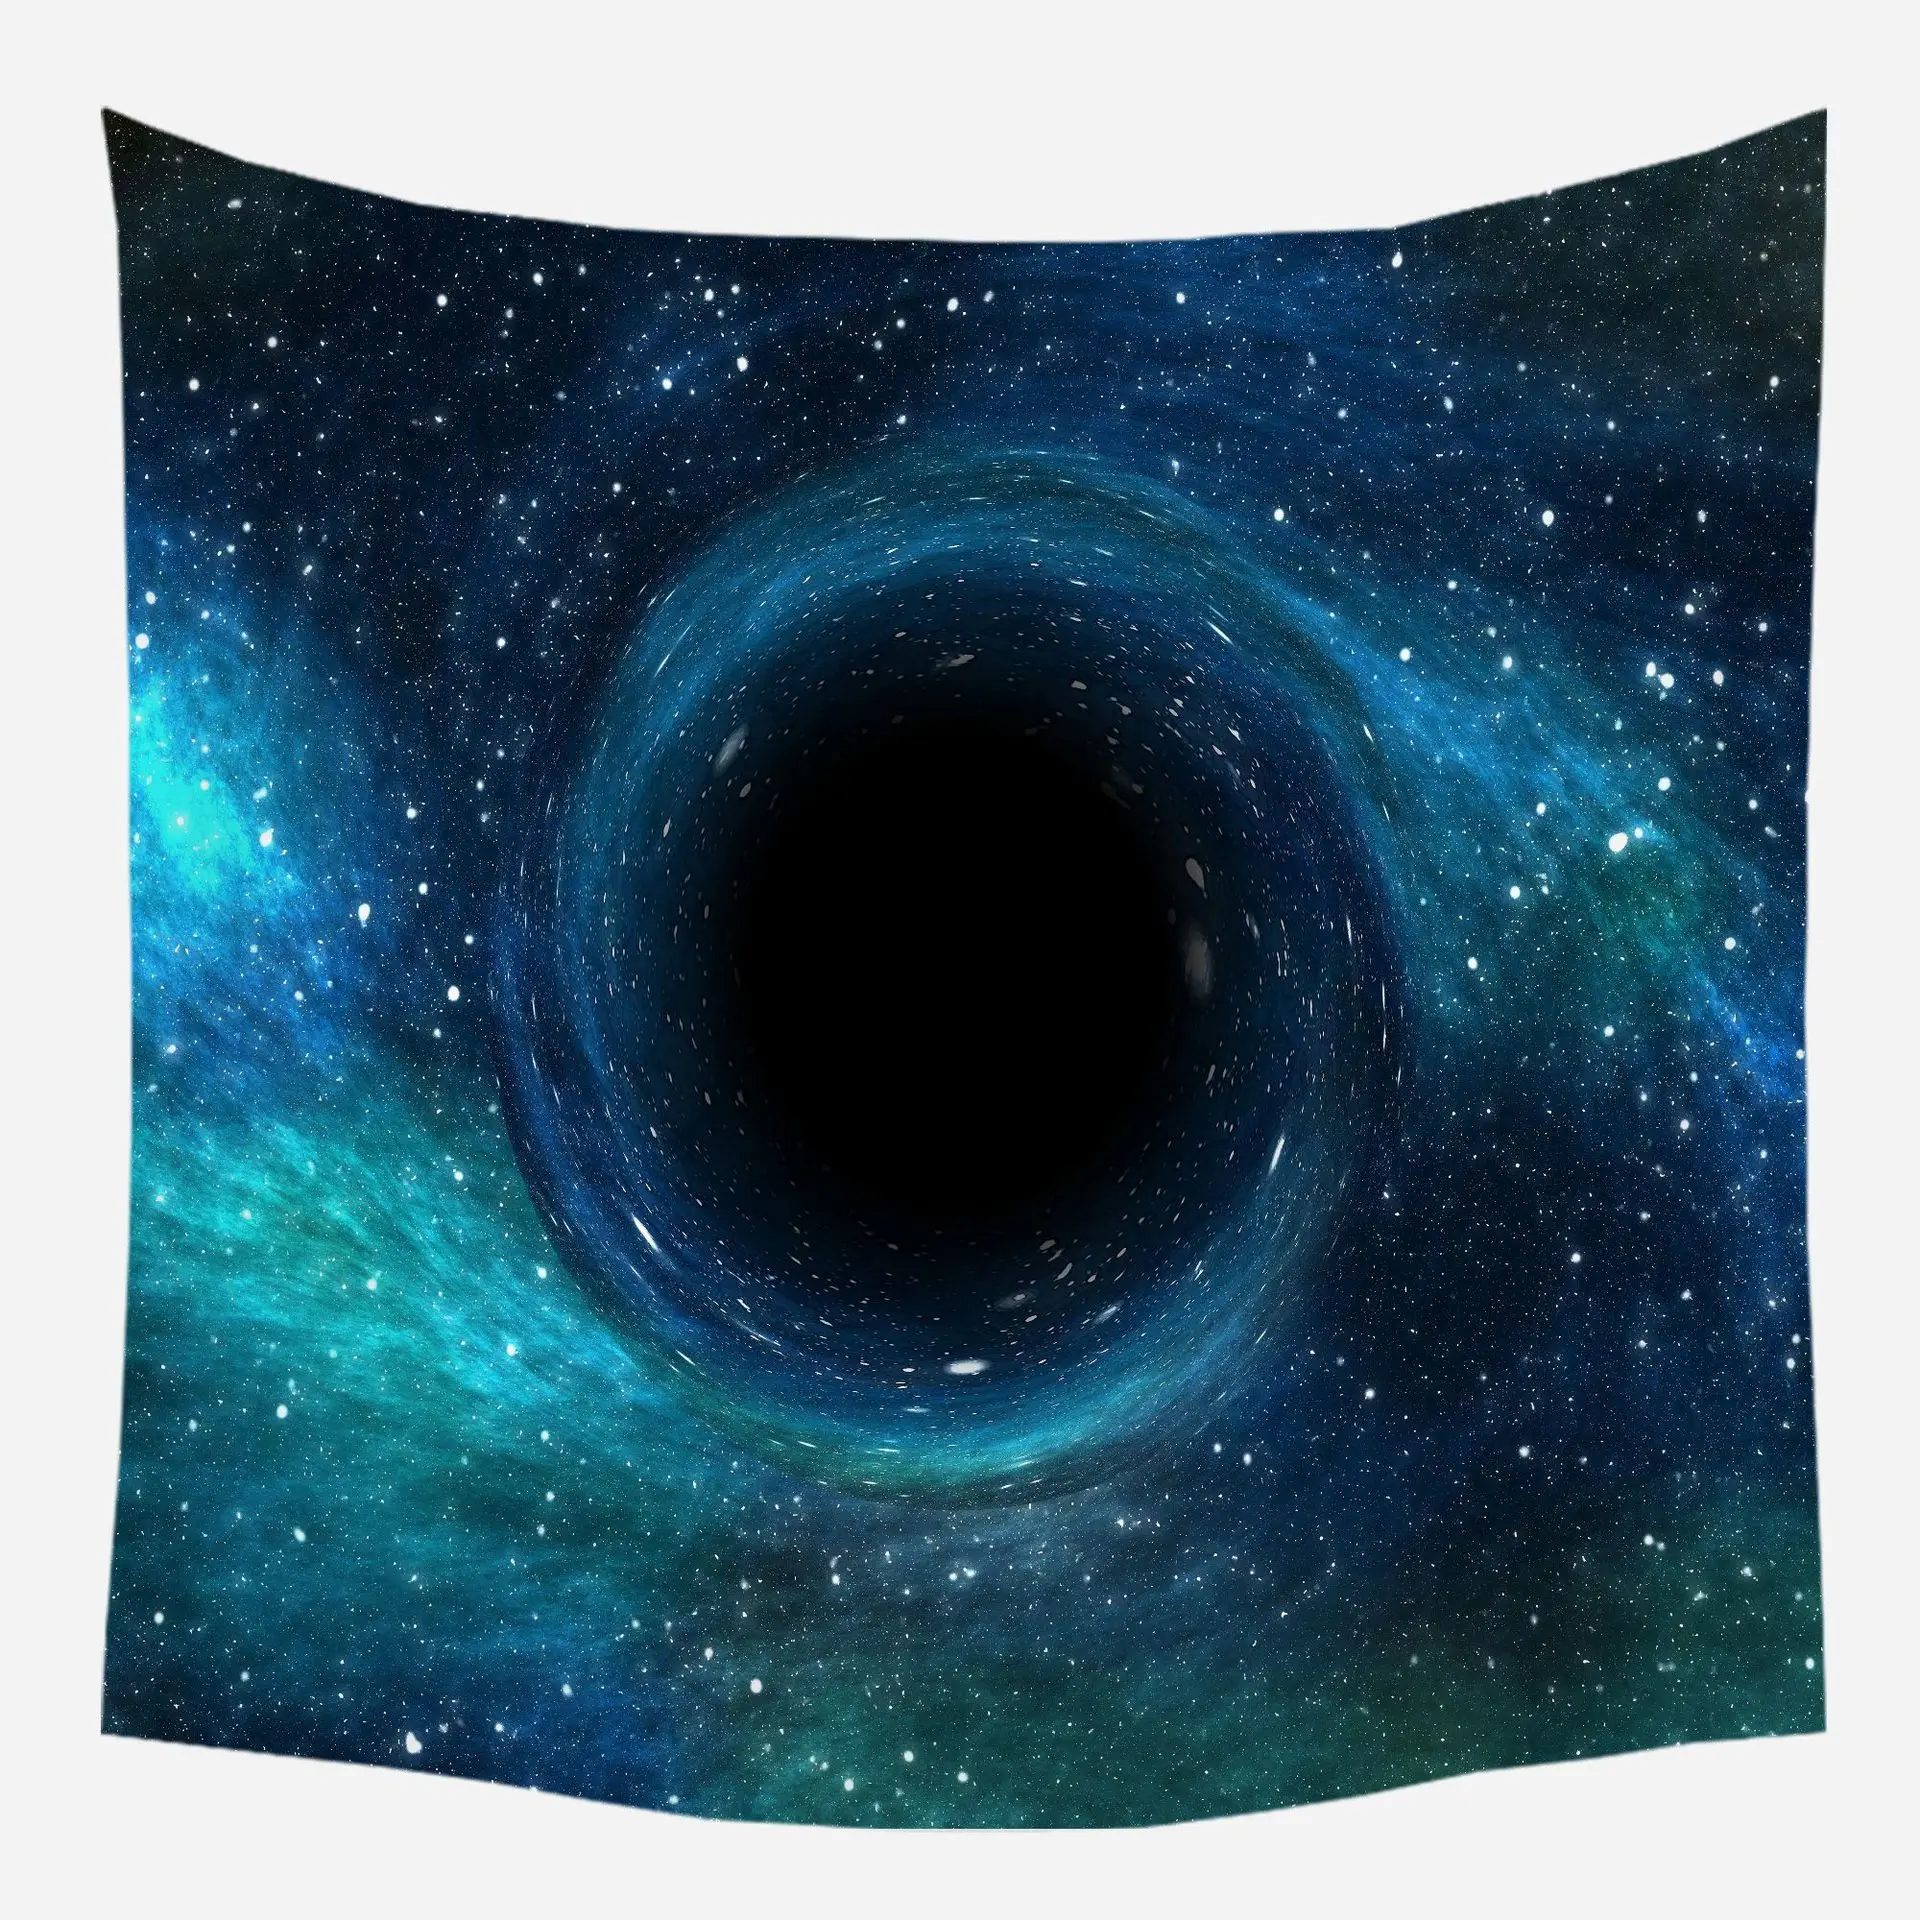 

Galactic Black Hole Tapestry Wall Hanging Gossip Tapestries Hippie Wall Rugs Dorm Decor Blanket 95x73cm